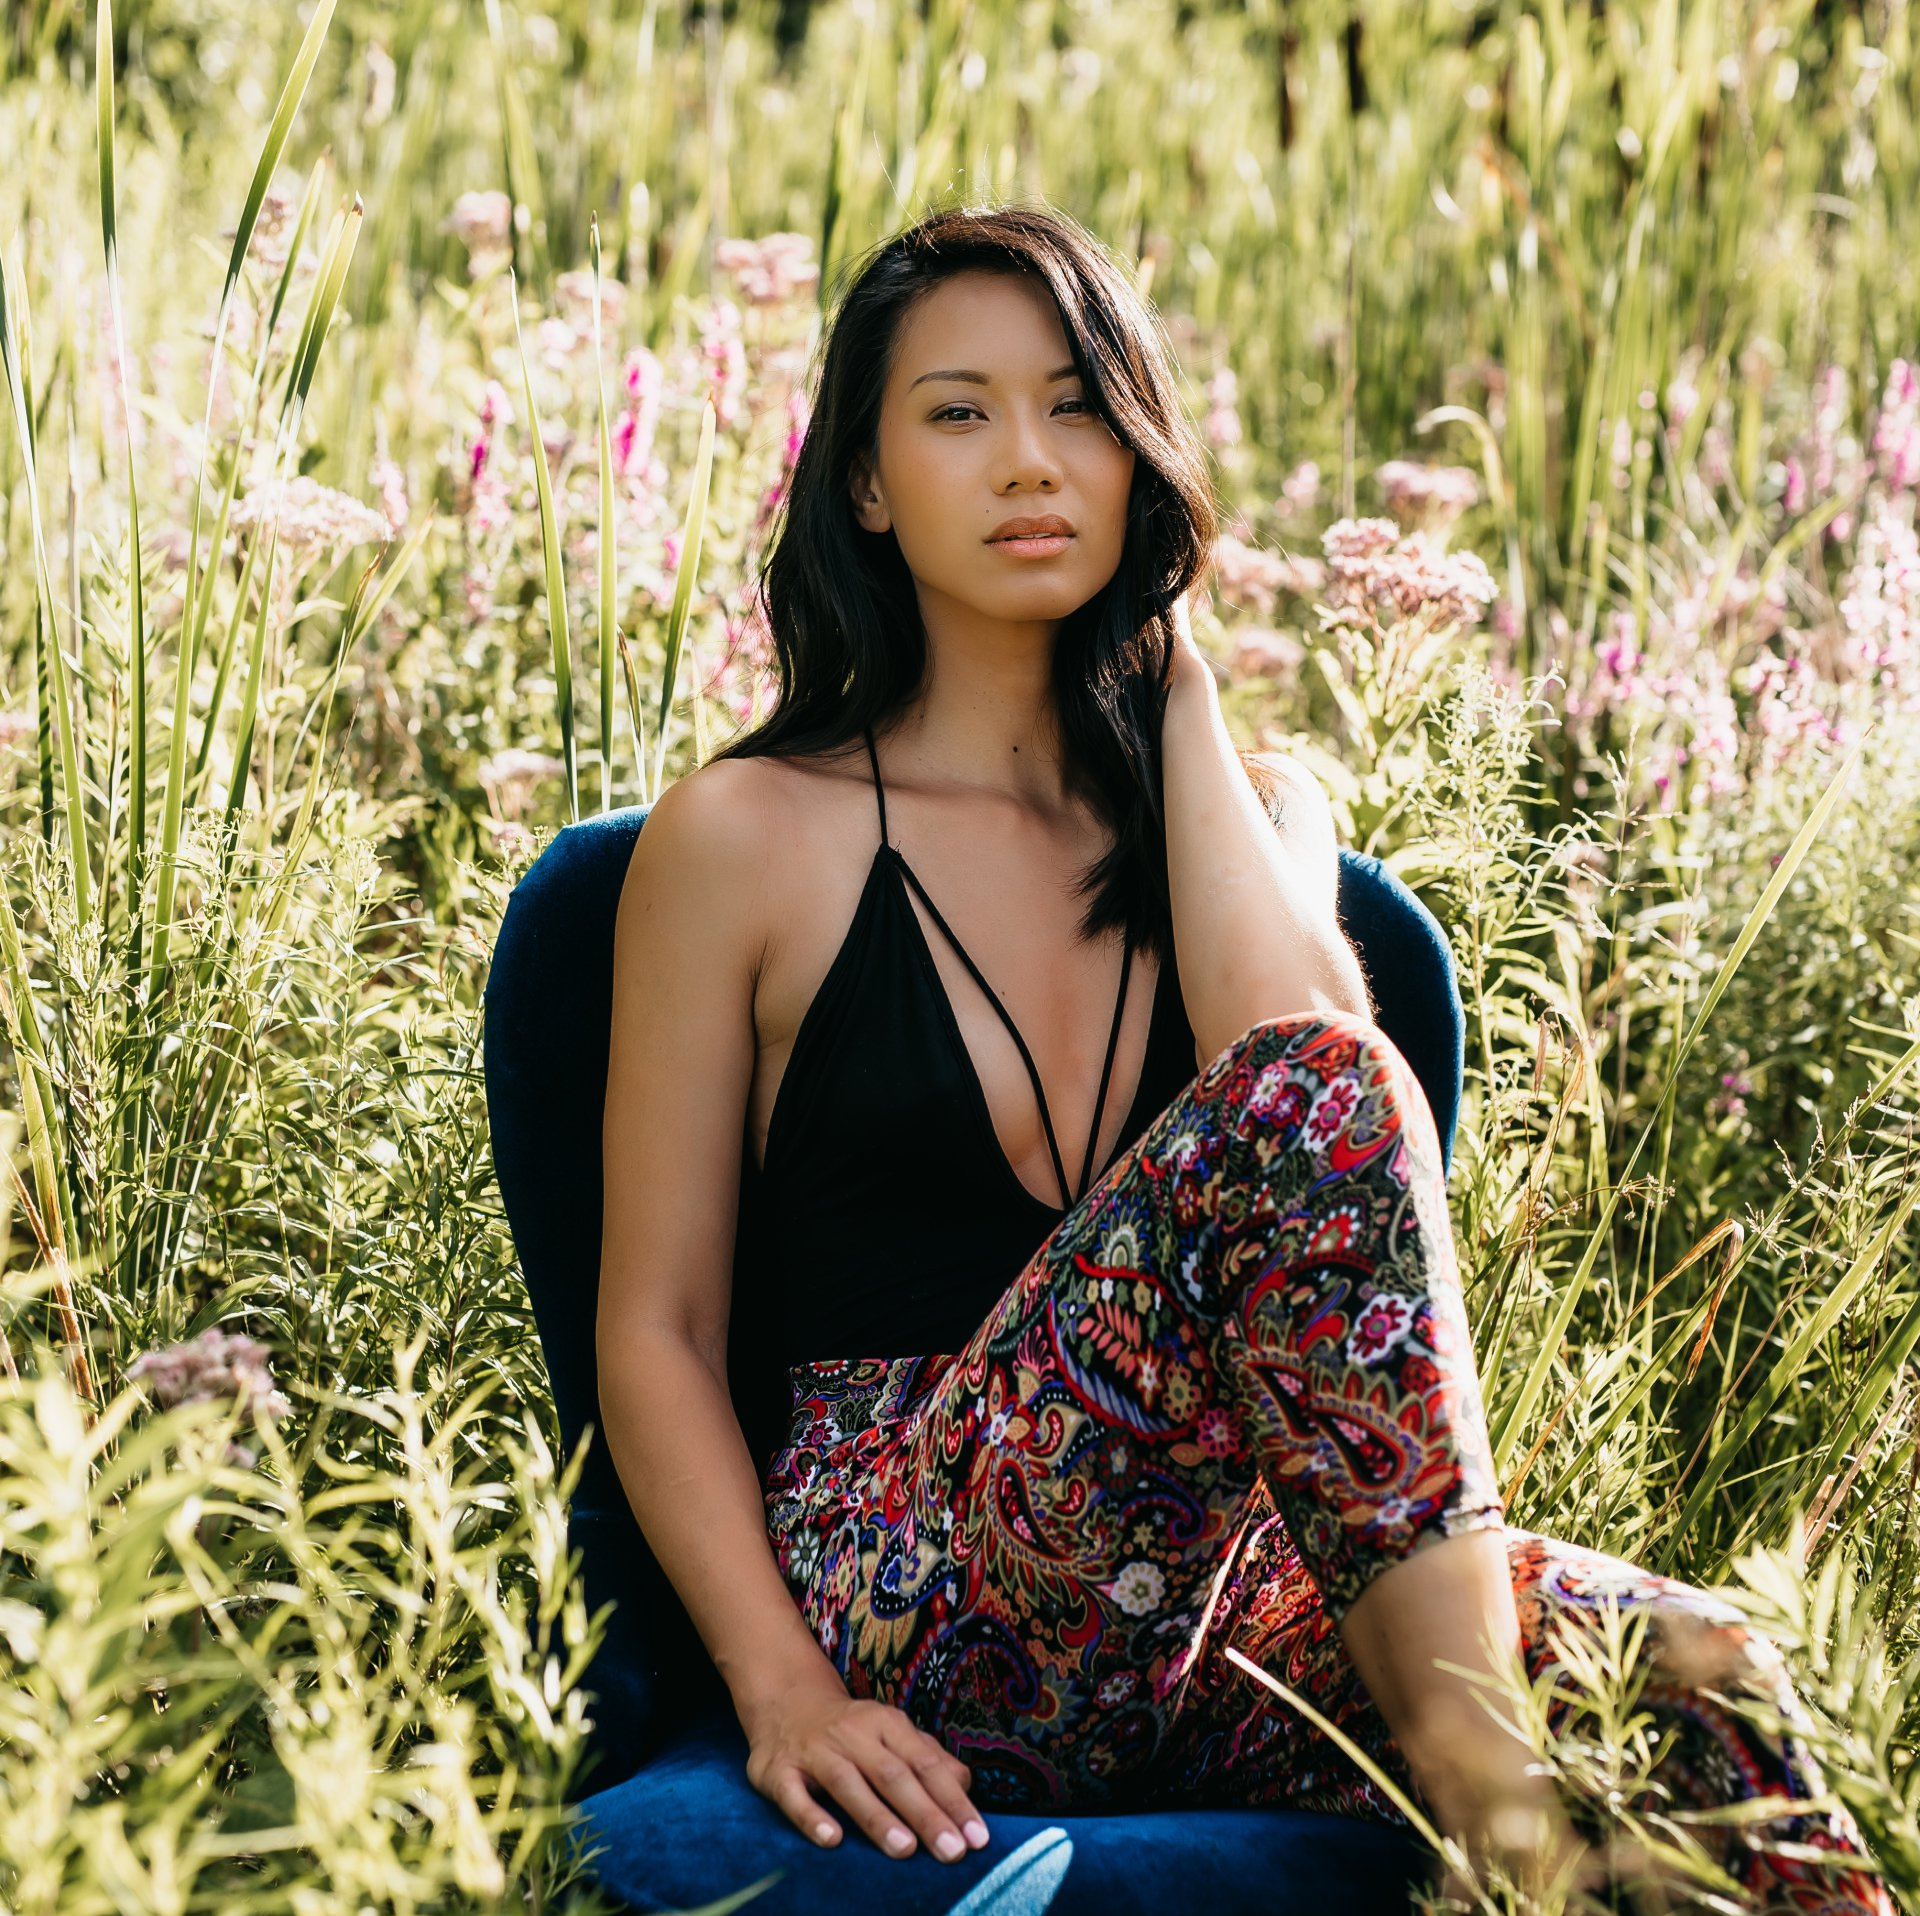 Personal branding photograph of a young lady with long black hair sitting in field with tall grasses and wild flowers